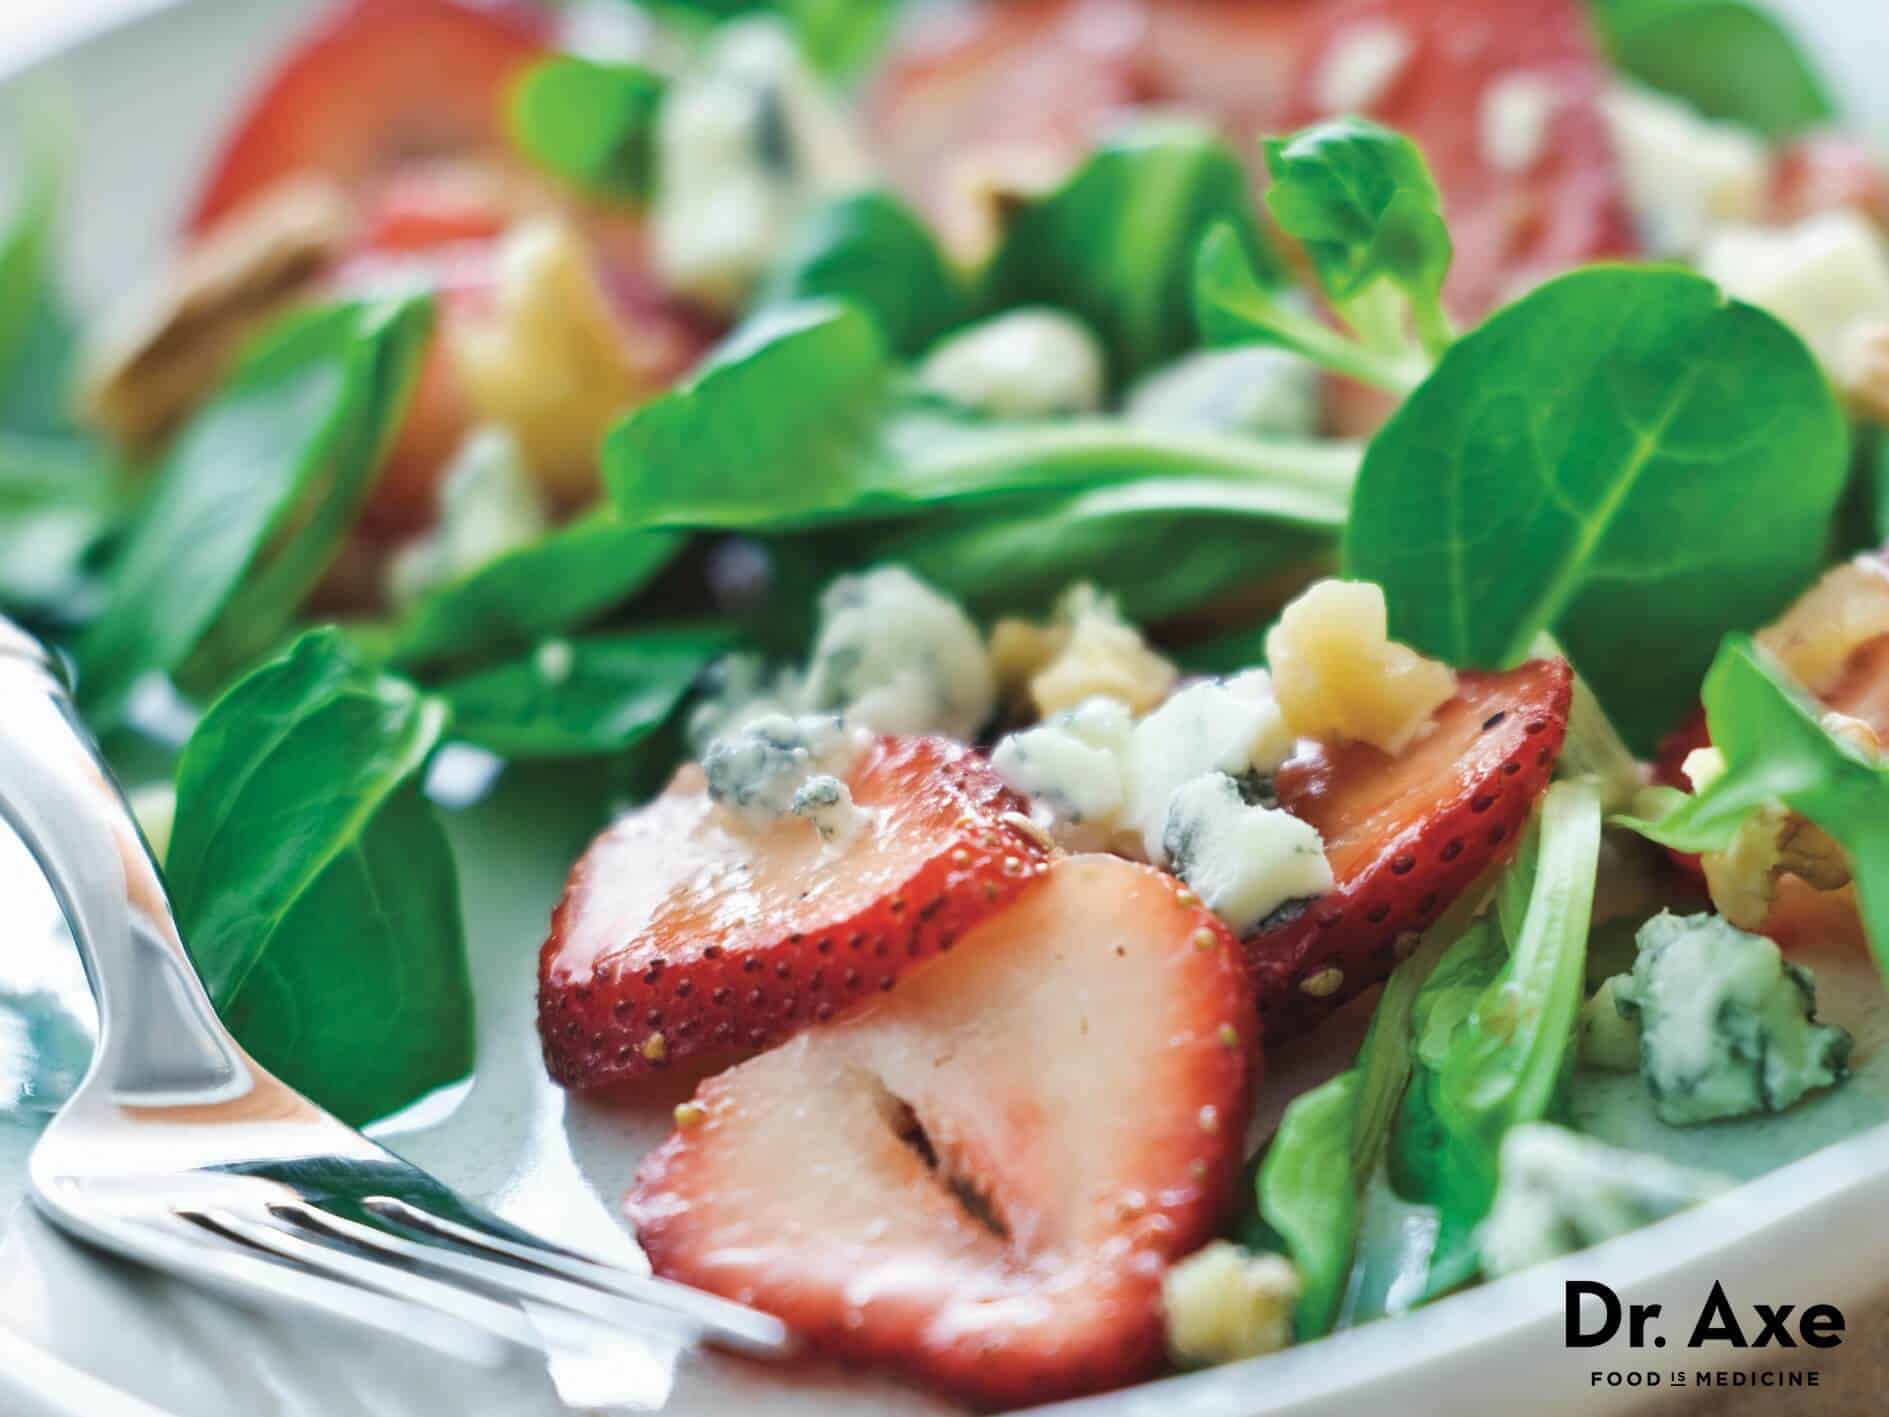 Berry goat cheese salad recipe - Dr. Axe